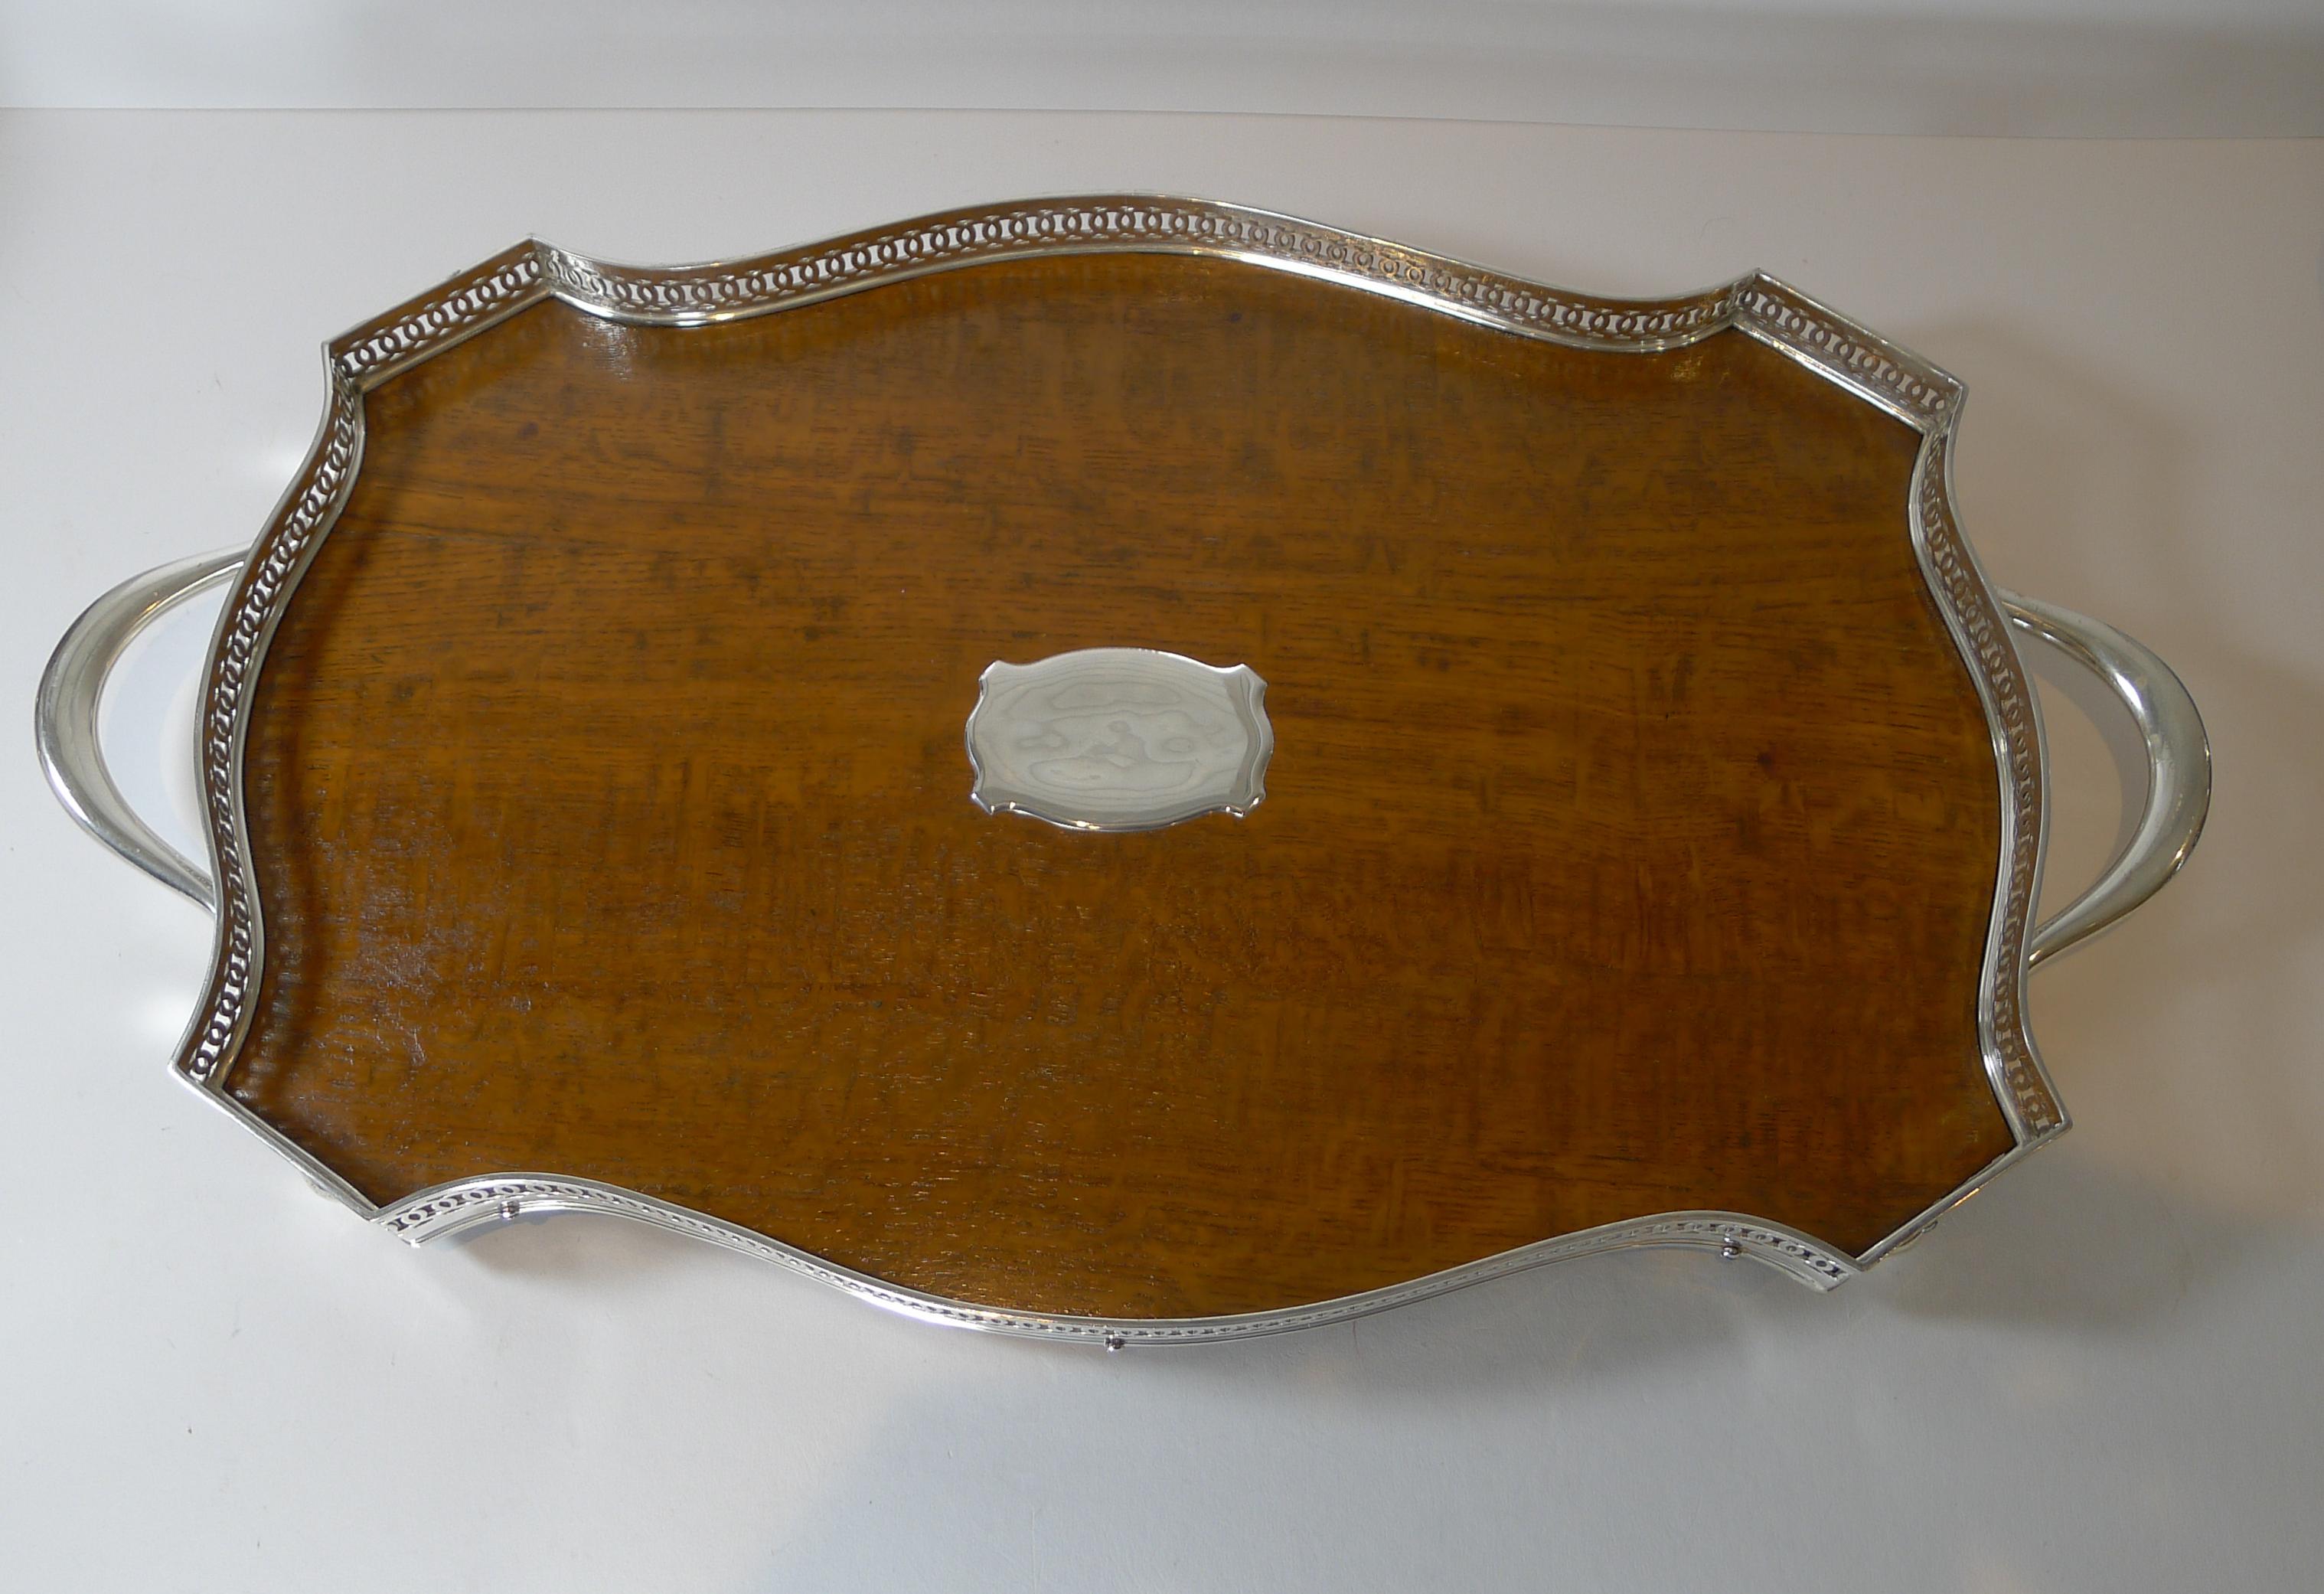 Edwardian Stunning Antique English Oak and Silver Plate Drinks Tray c.1900